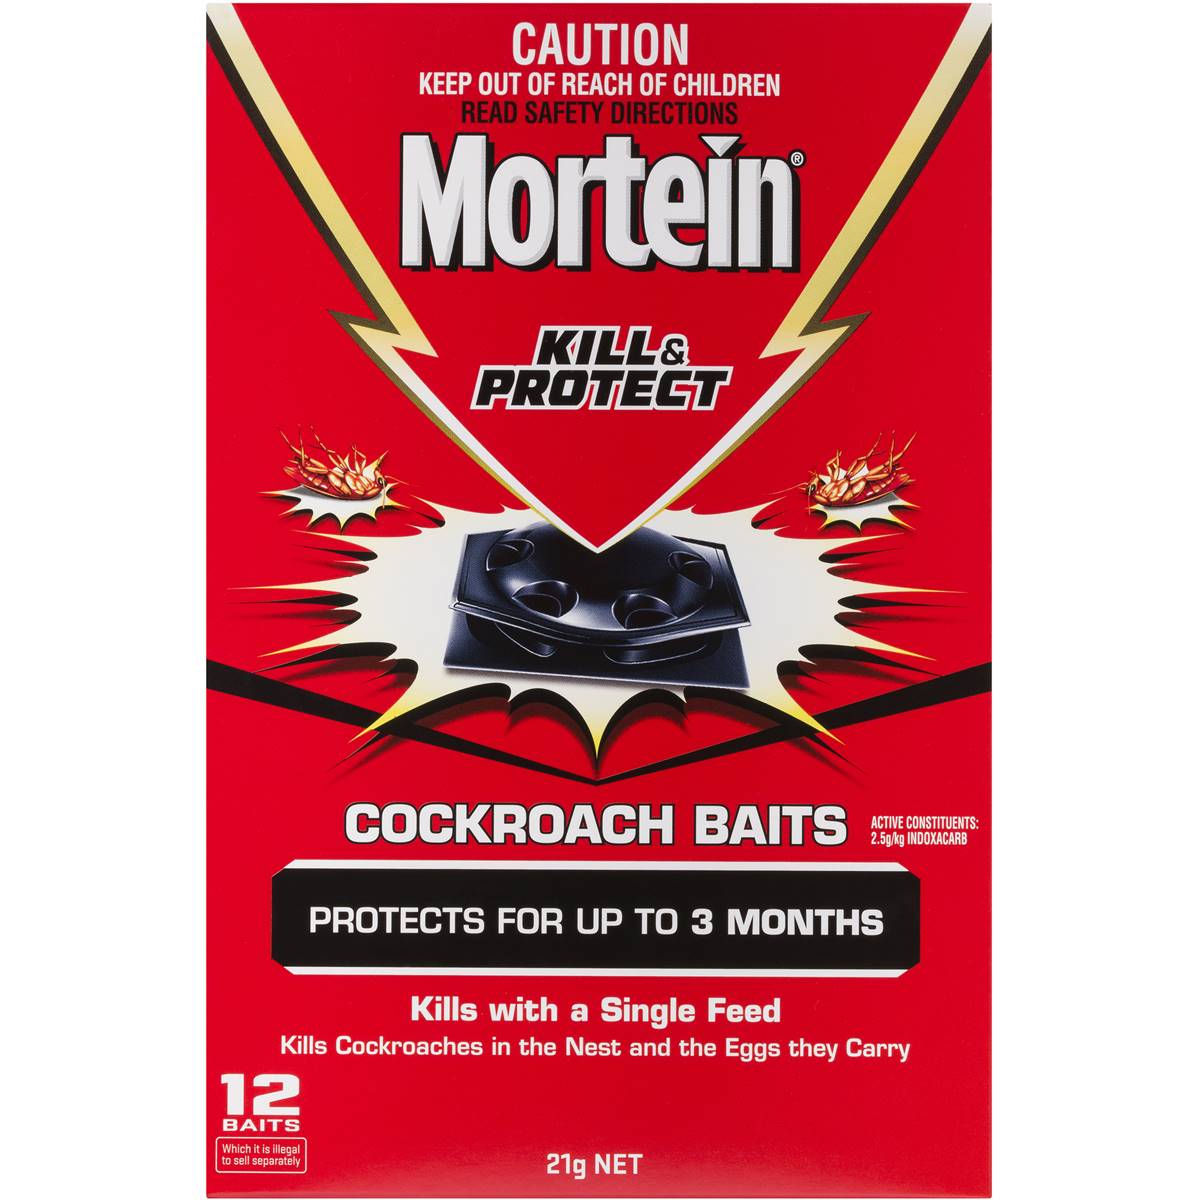 Mortein Plus Insect Control Superbaits Nest Killer